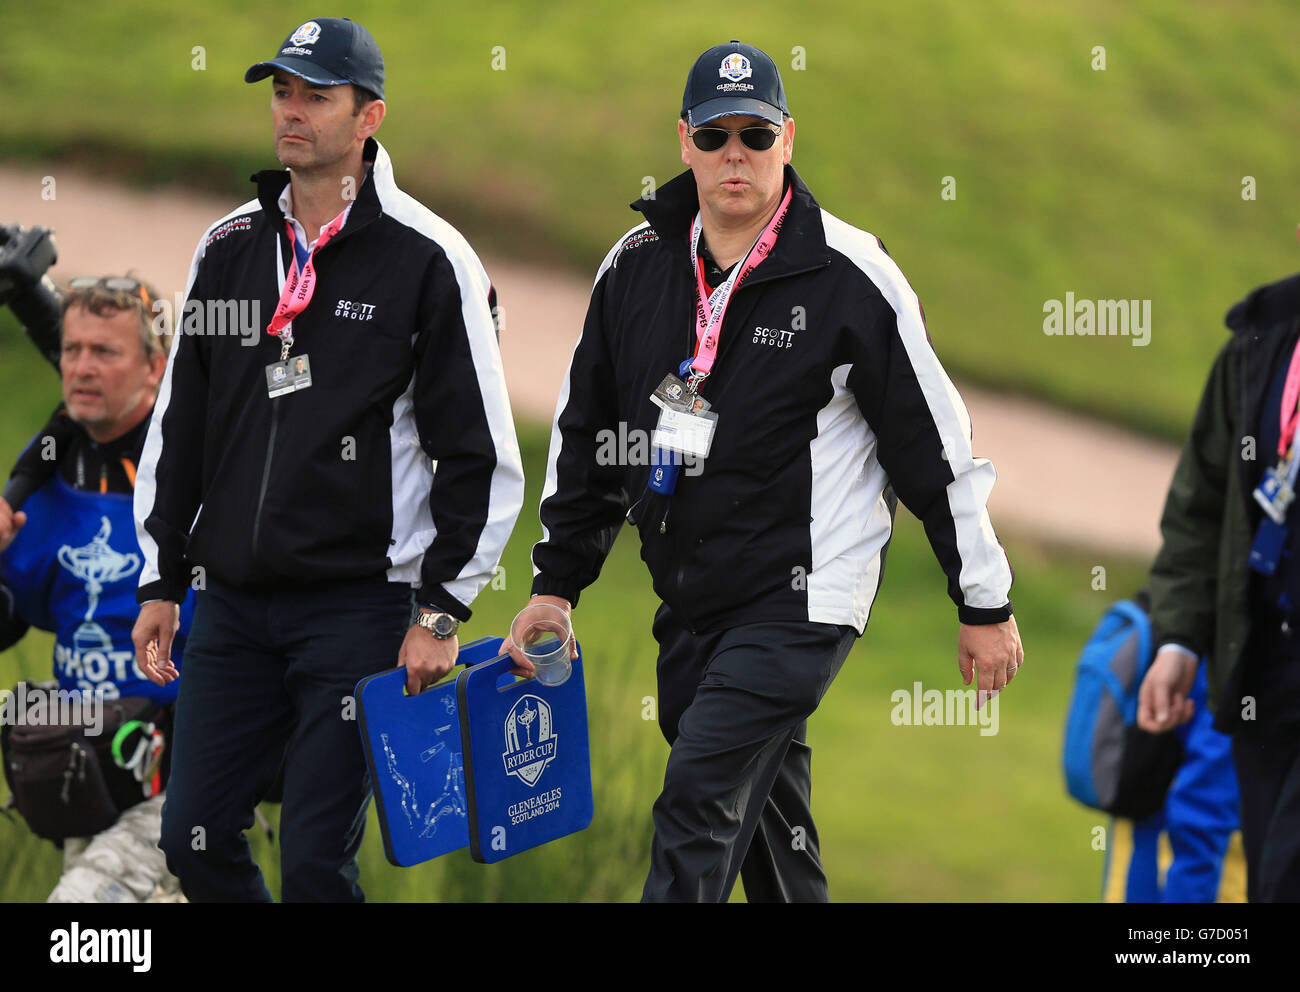 Albert II, Prince of Monaco during the Foursomes matches on day two of the 40th Ryder Cup at Gleneagles Golf Course, Perthshire. Stock Photo